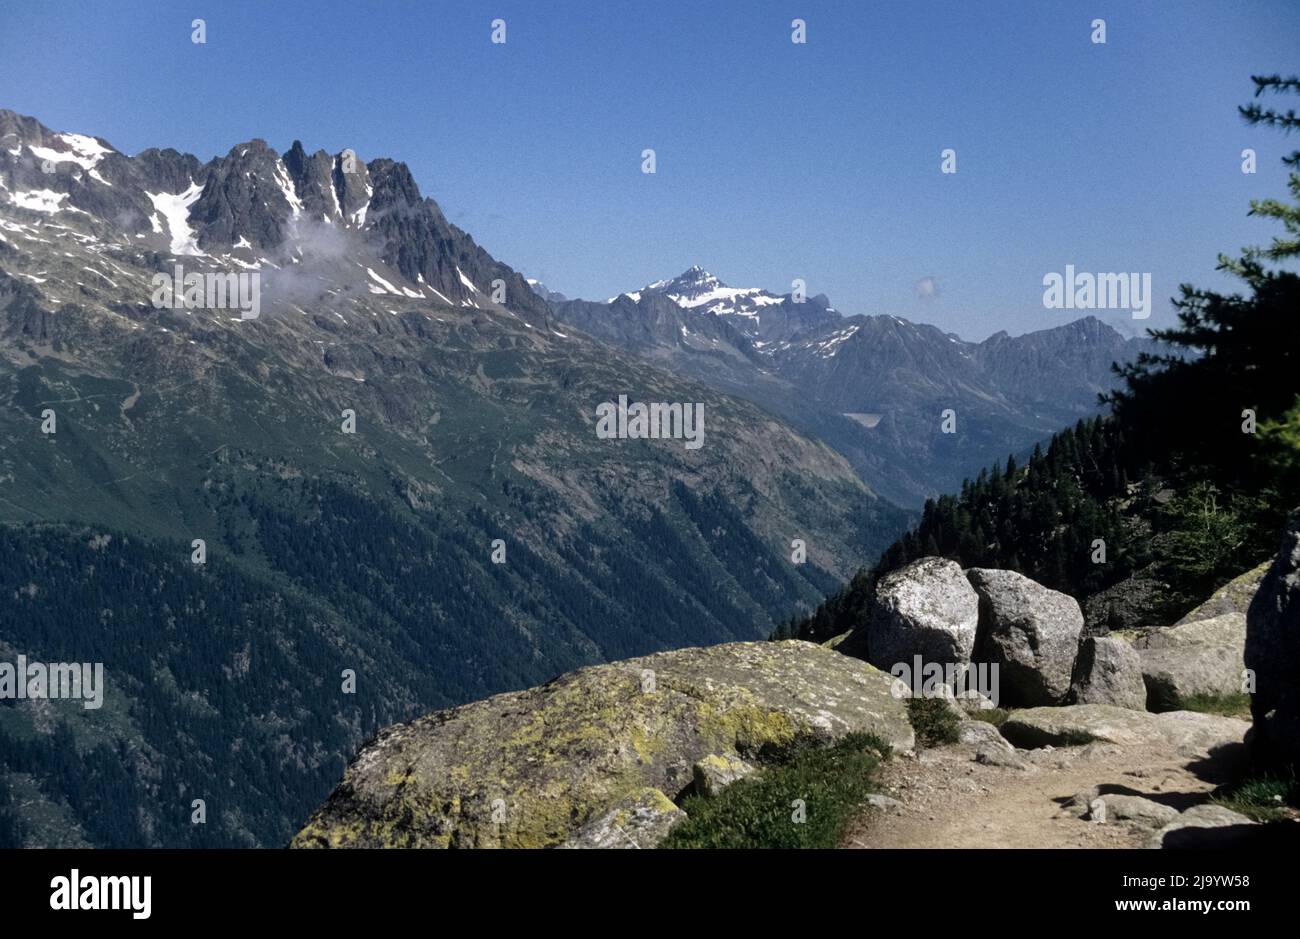 The Aiguilles Rouges seen from the Plan d'Aiguille to Montenvers hiking trail, Chamonix-Mont-Blanc, France,1990 Stock Photo